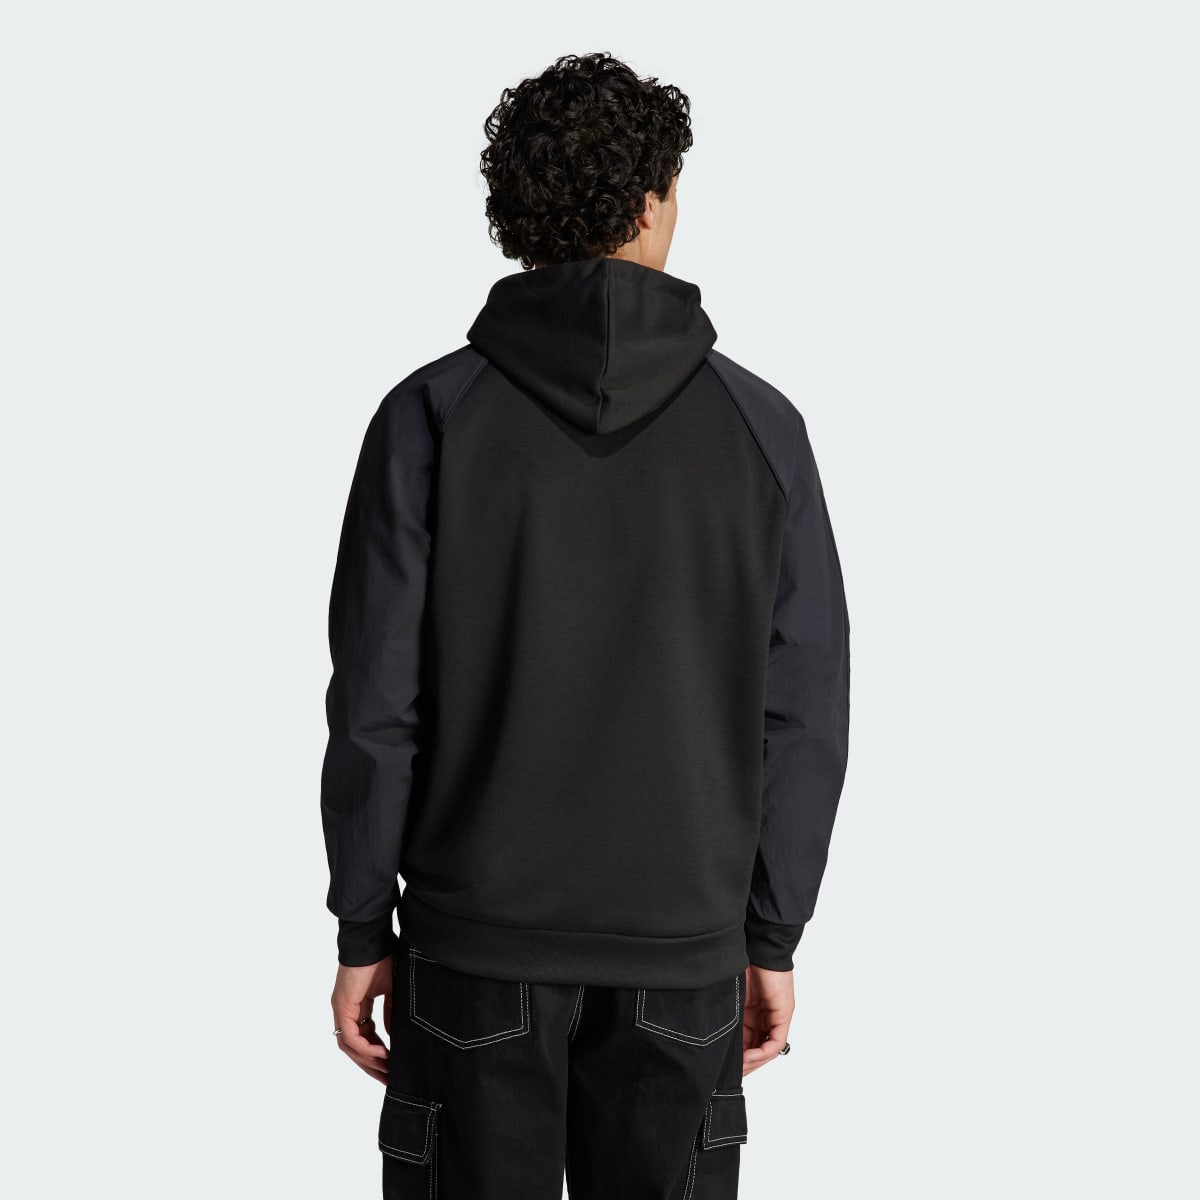 Adidas Adicolor Re-Pro SST Material Mix Hoodie. 4